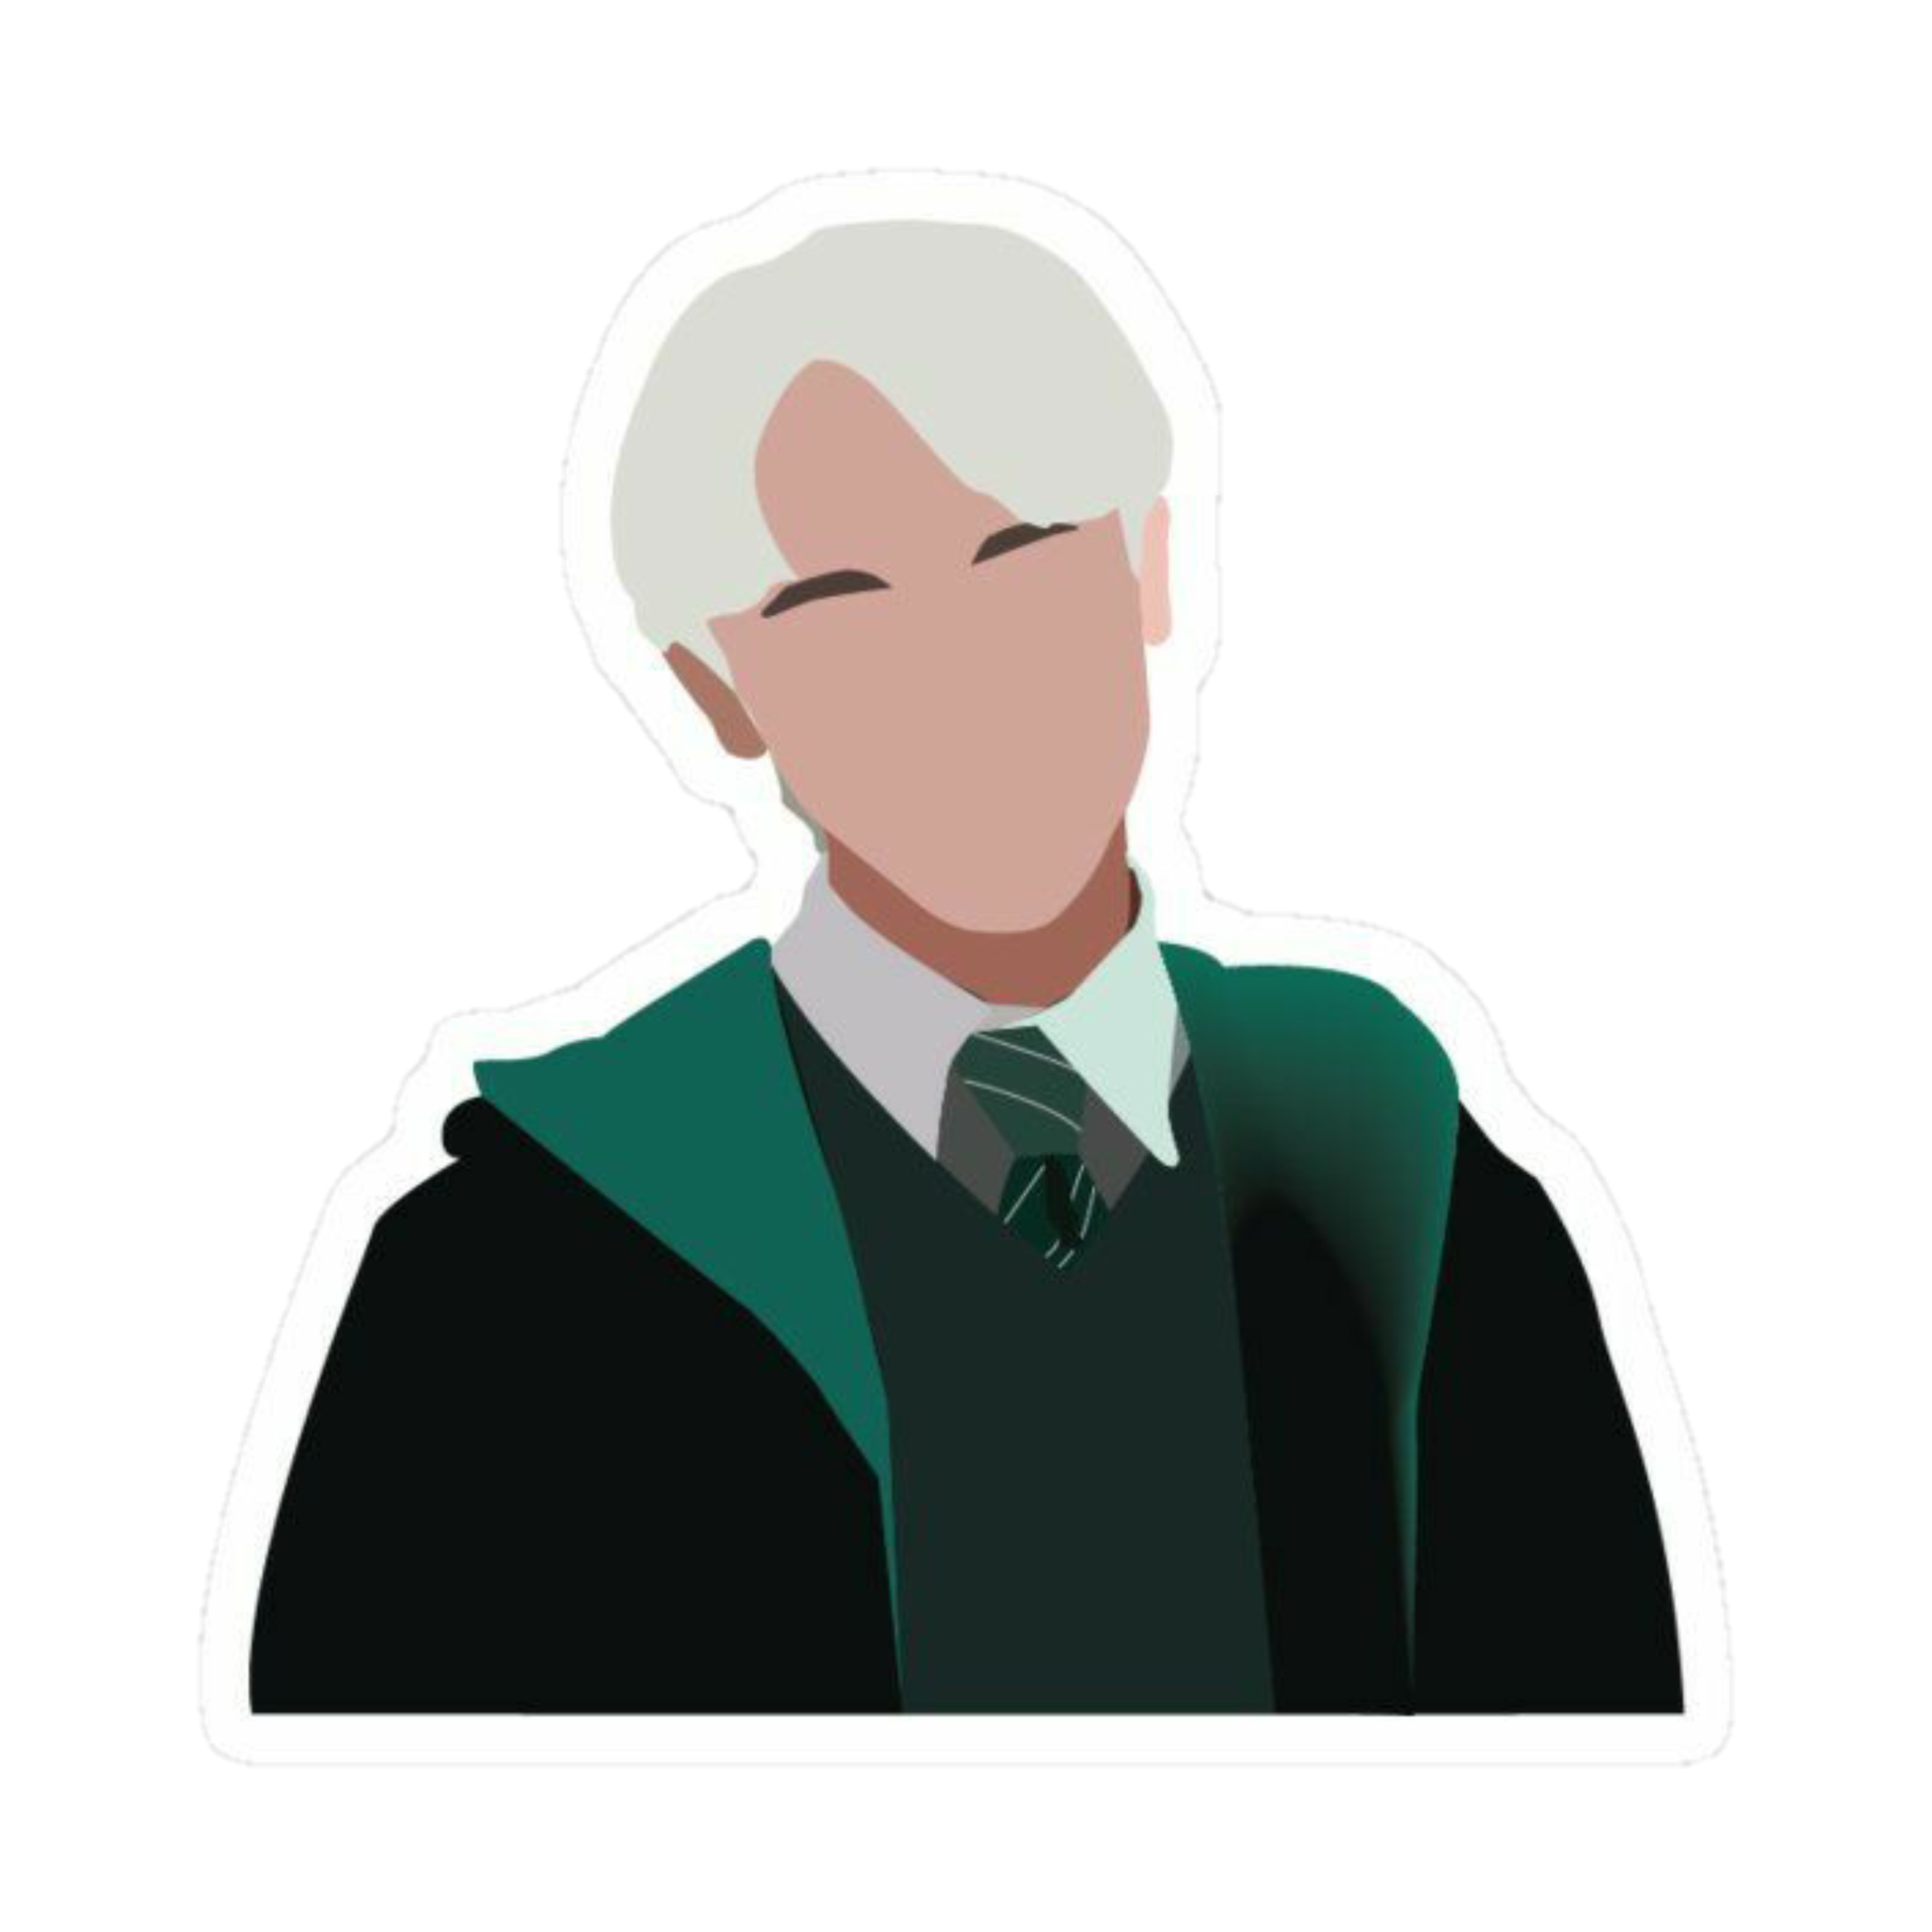 This visual is about art dracomalfoy draco malfoy hogwarts harrypotter harr...